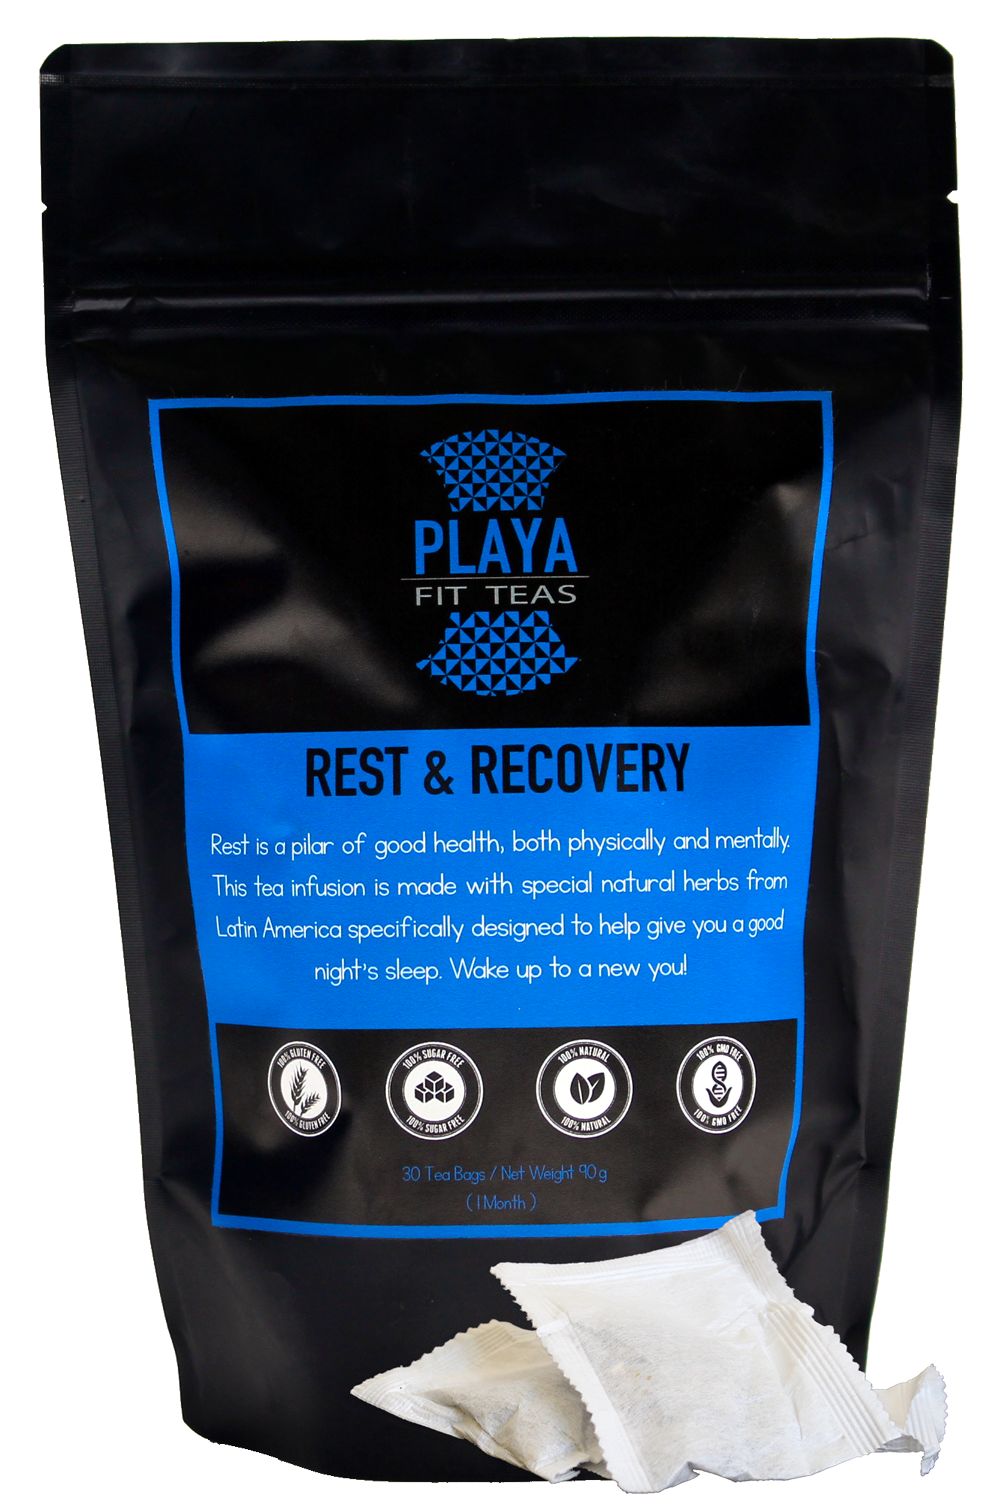 Rest & Recovery - Playa Fit Teas Chile